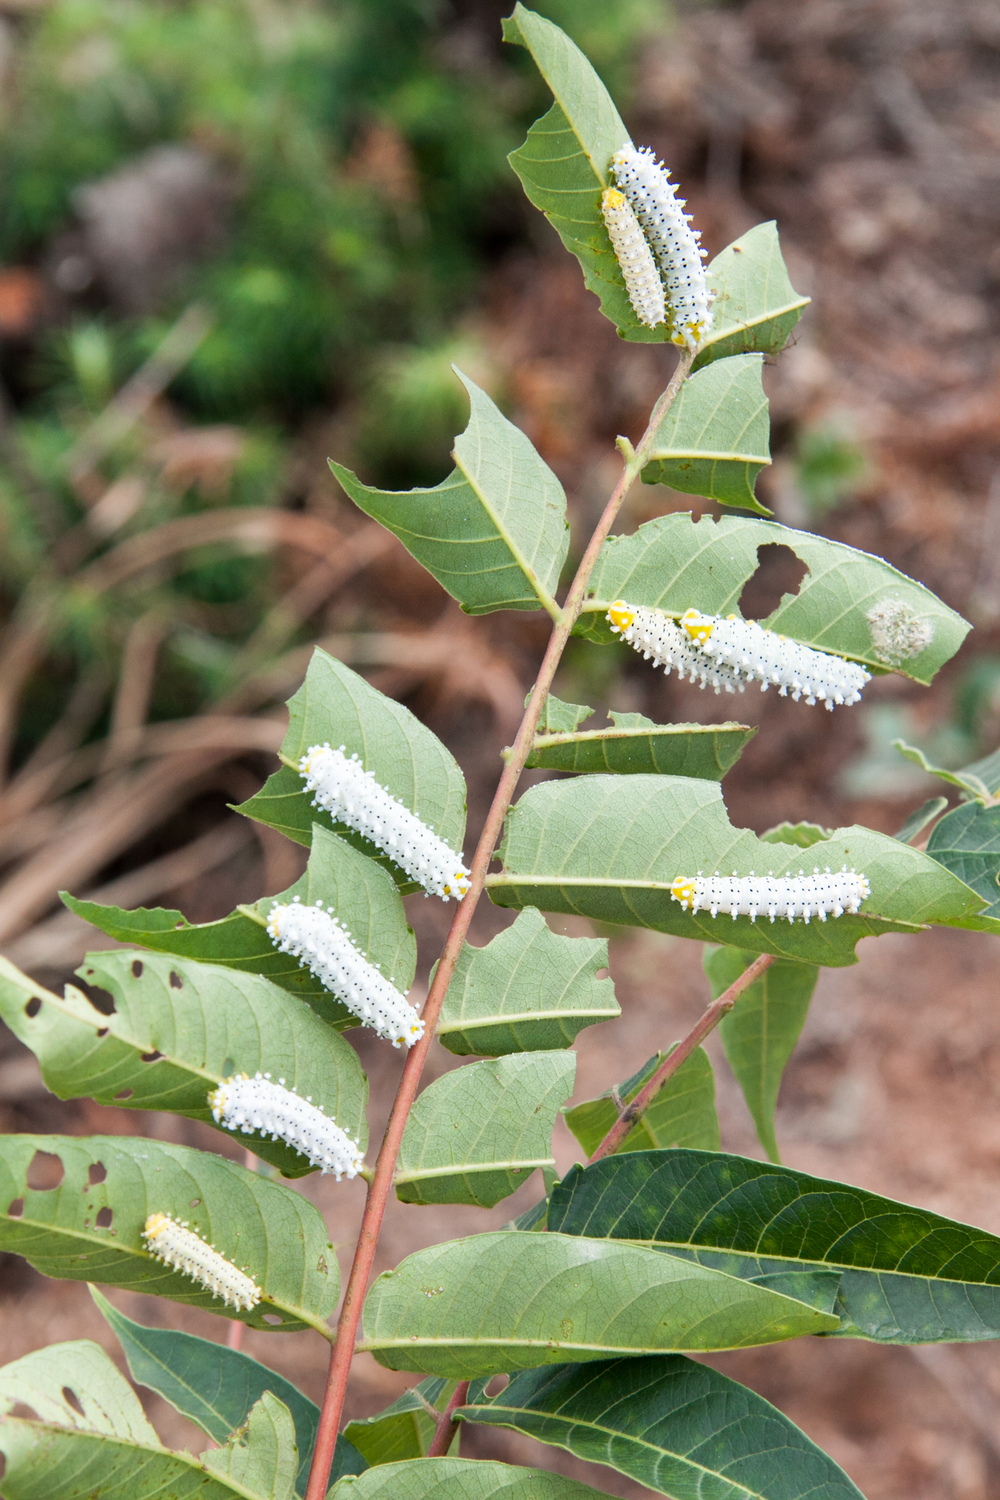 Butterfly larvae munching on leaves: these are common plant-eaters in the forest